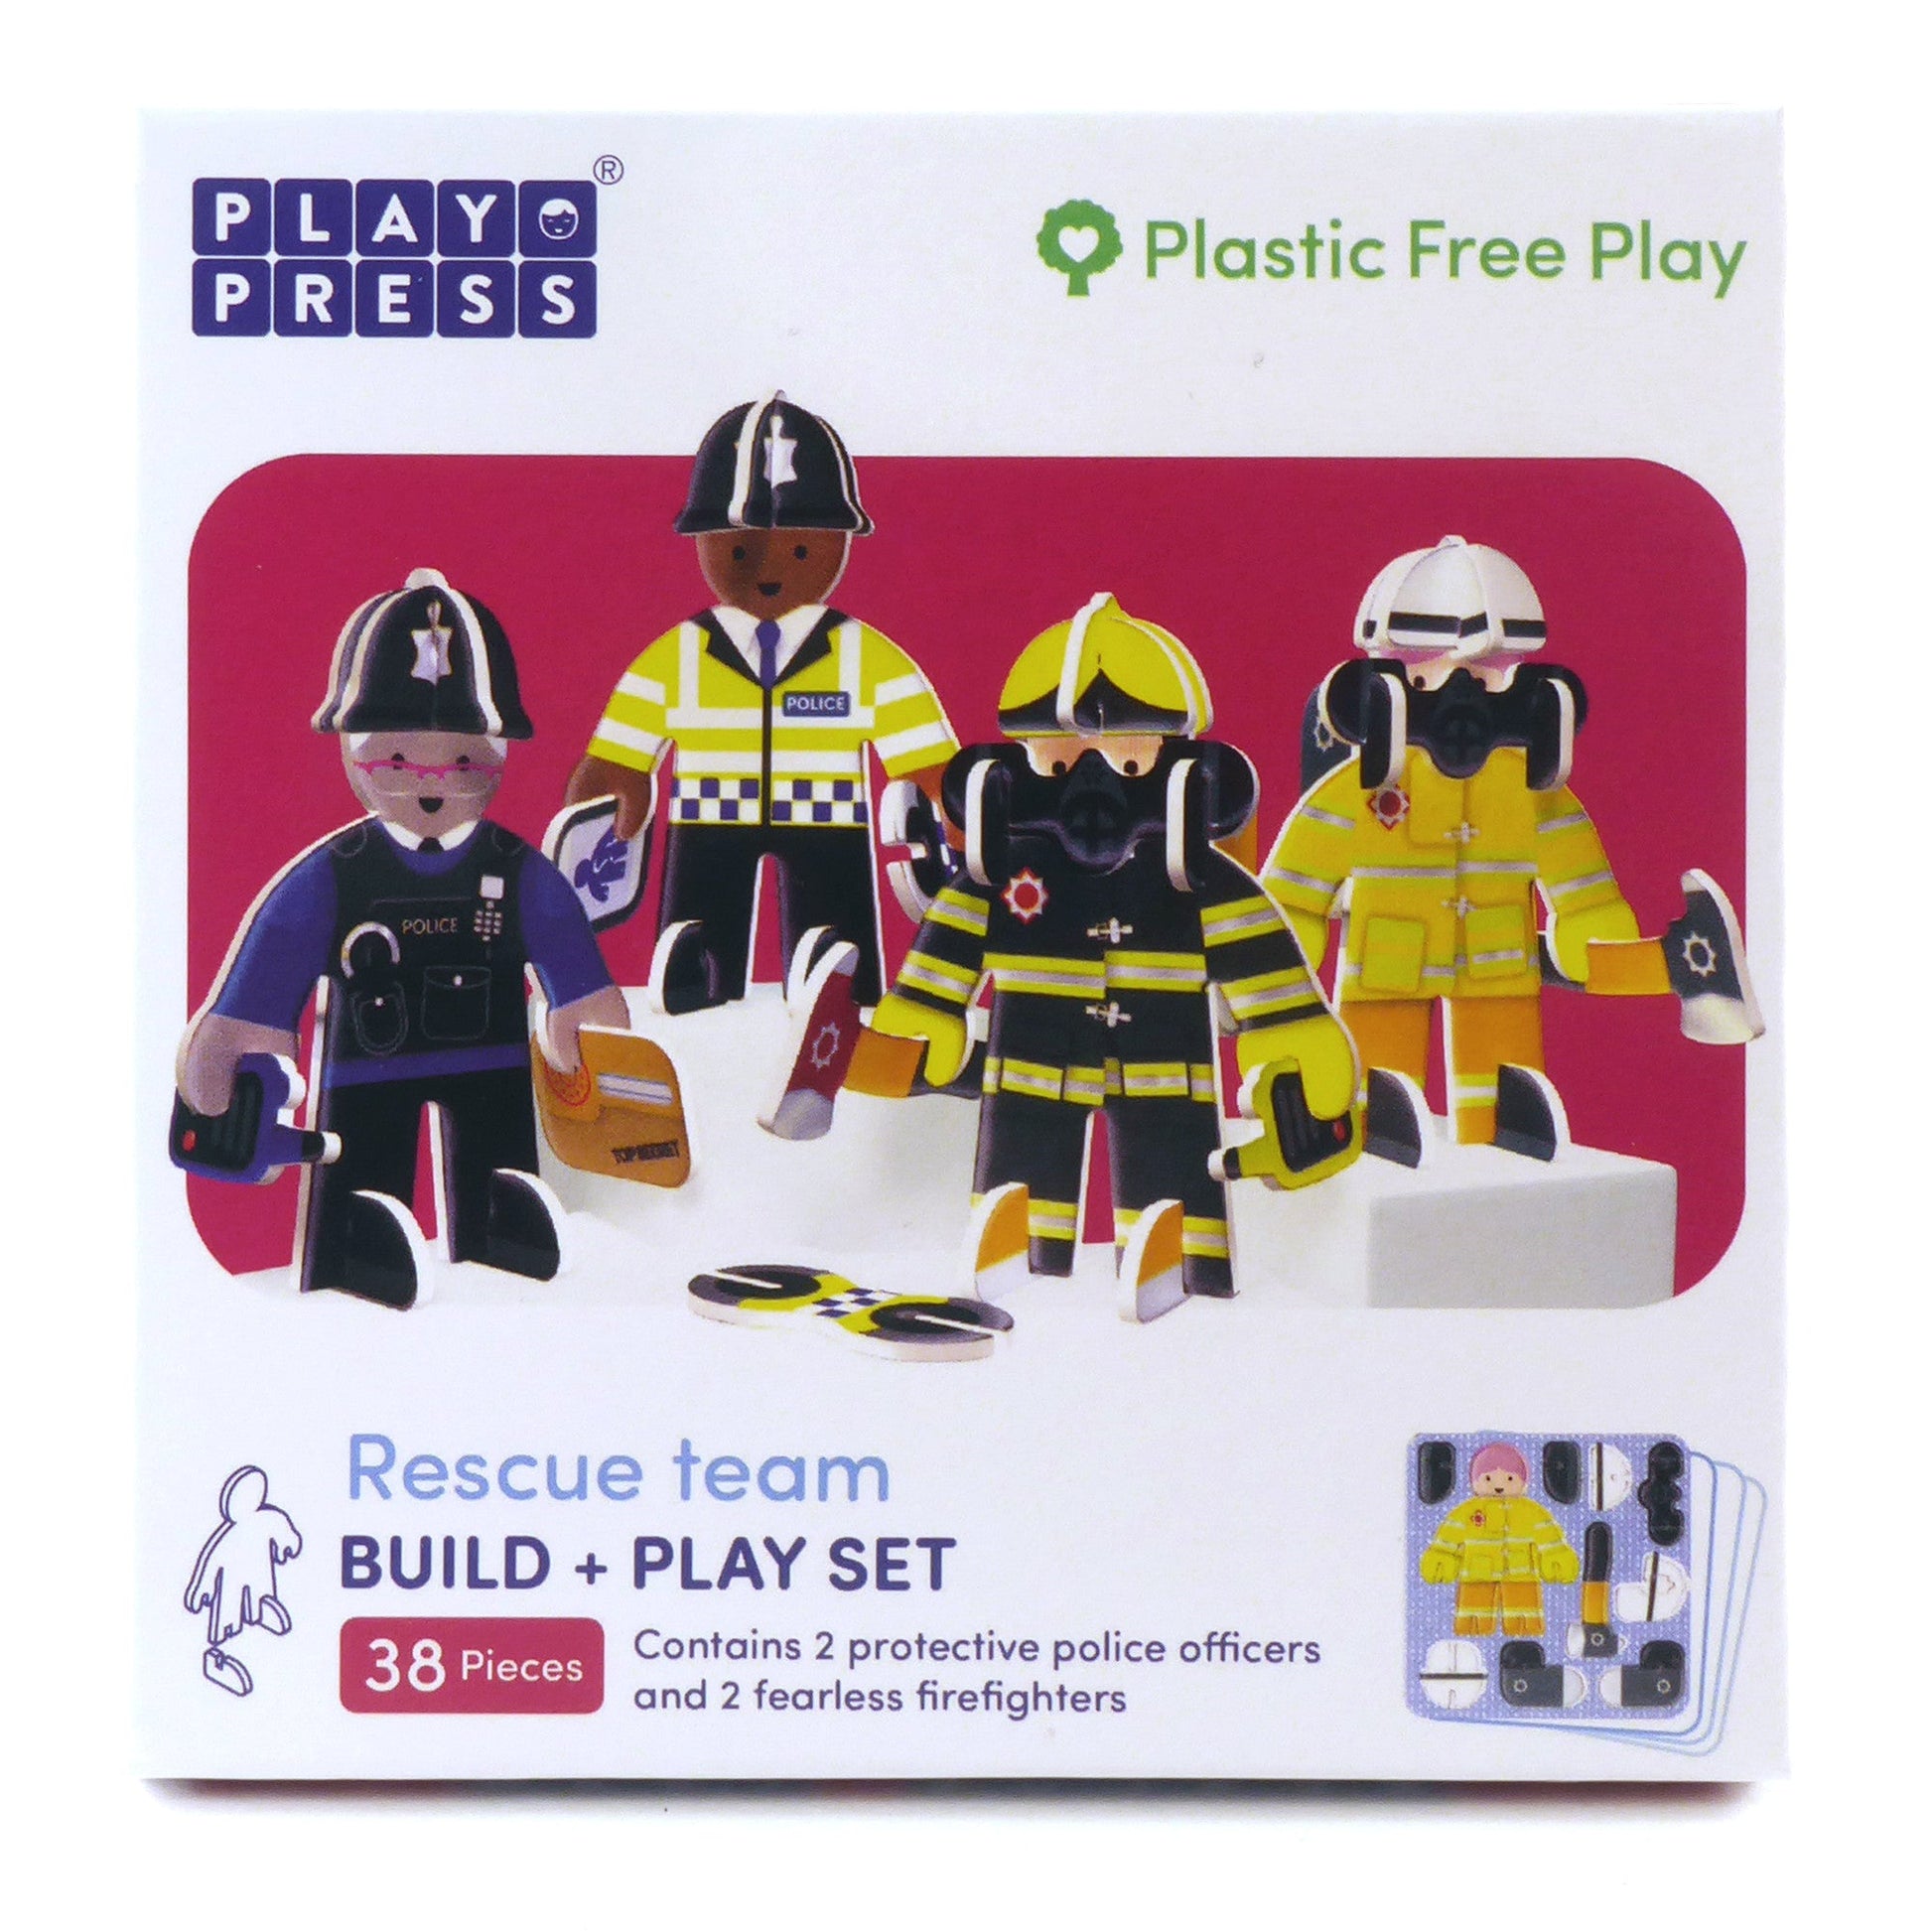 PlayPress Rescue Team - Eco-friendly and imaginative set for creative and sustainable play